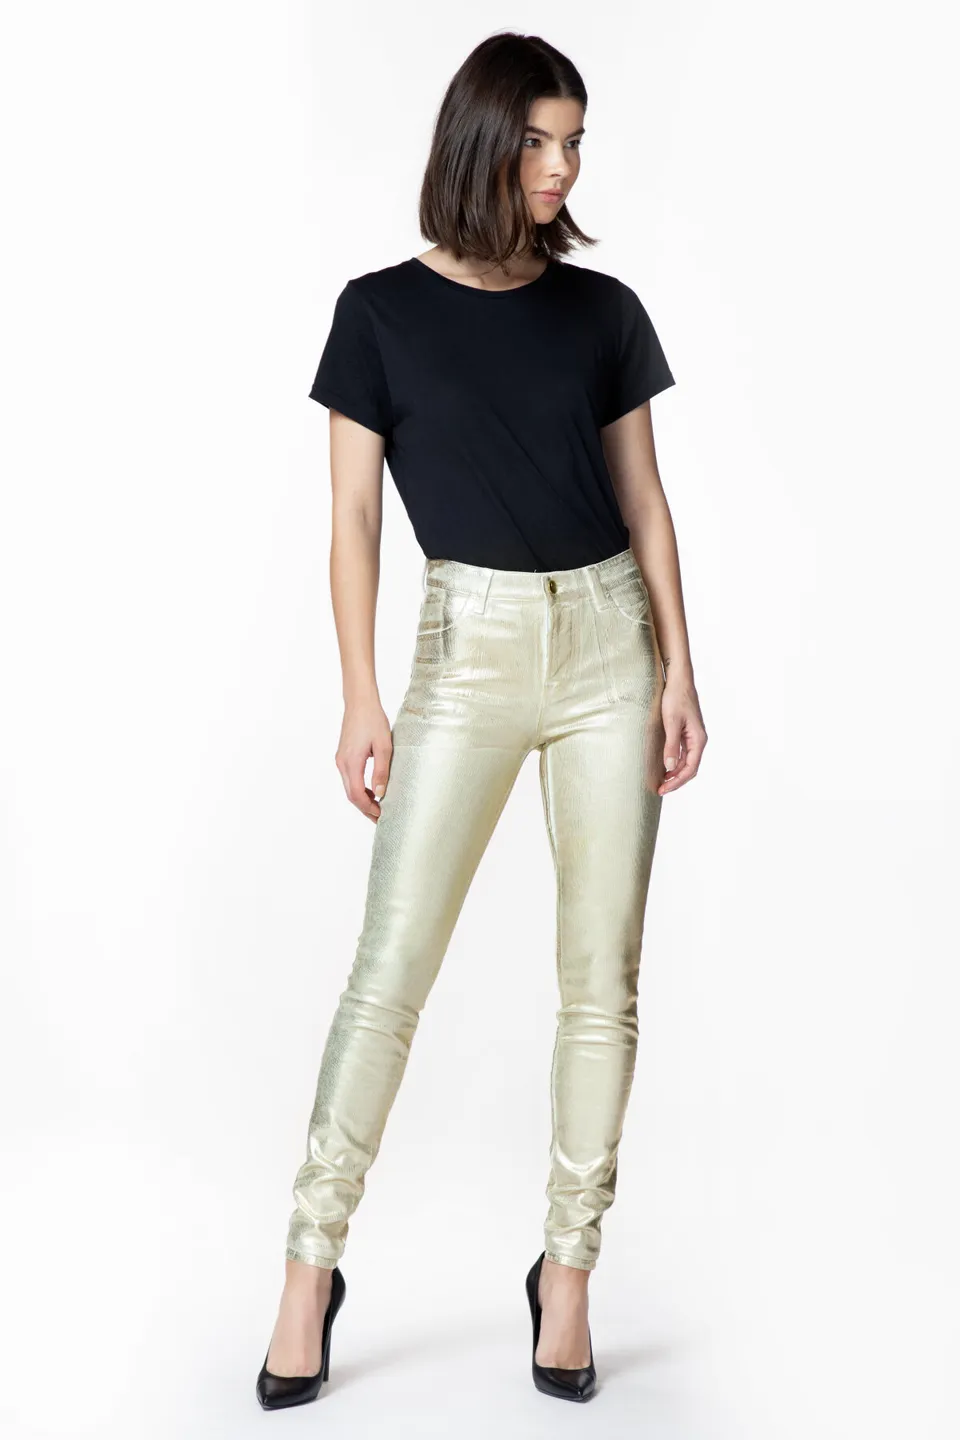 Rise in the Trend of Coated Jeans - LOVALL